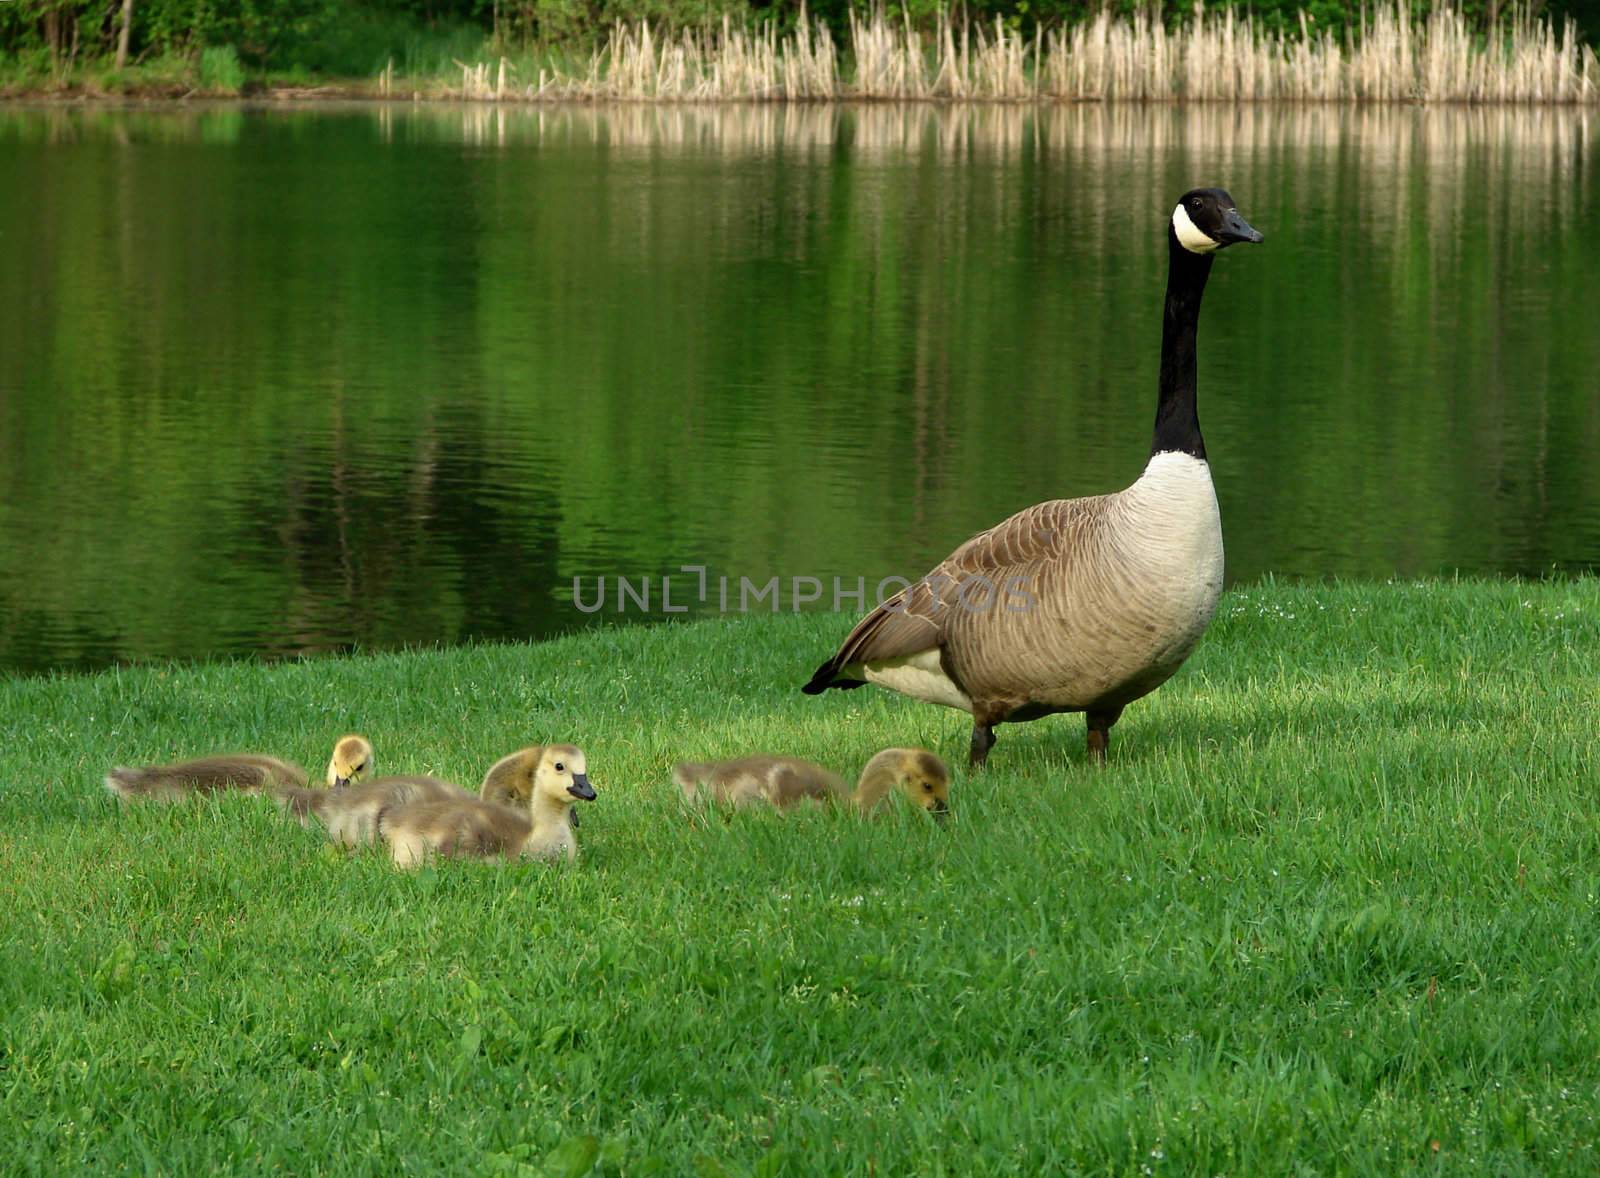 Goose with it babies on the lawn by a river